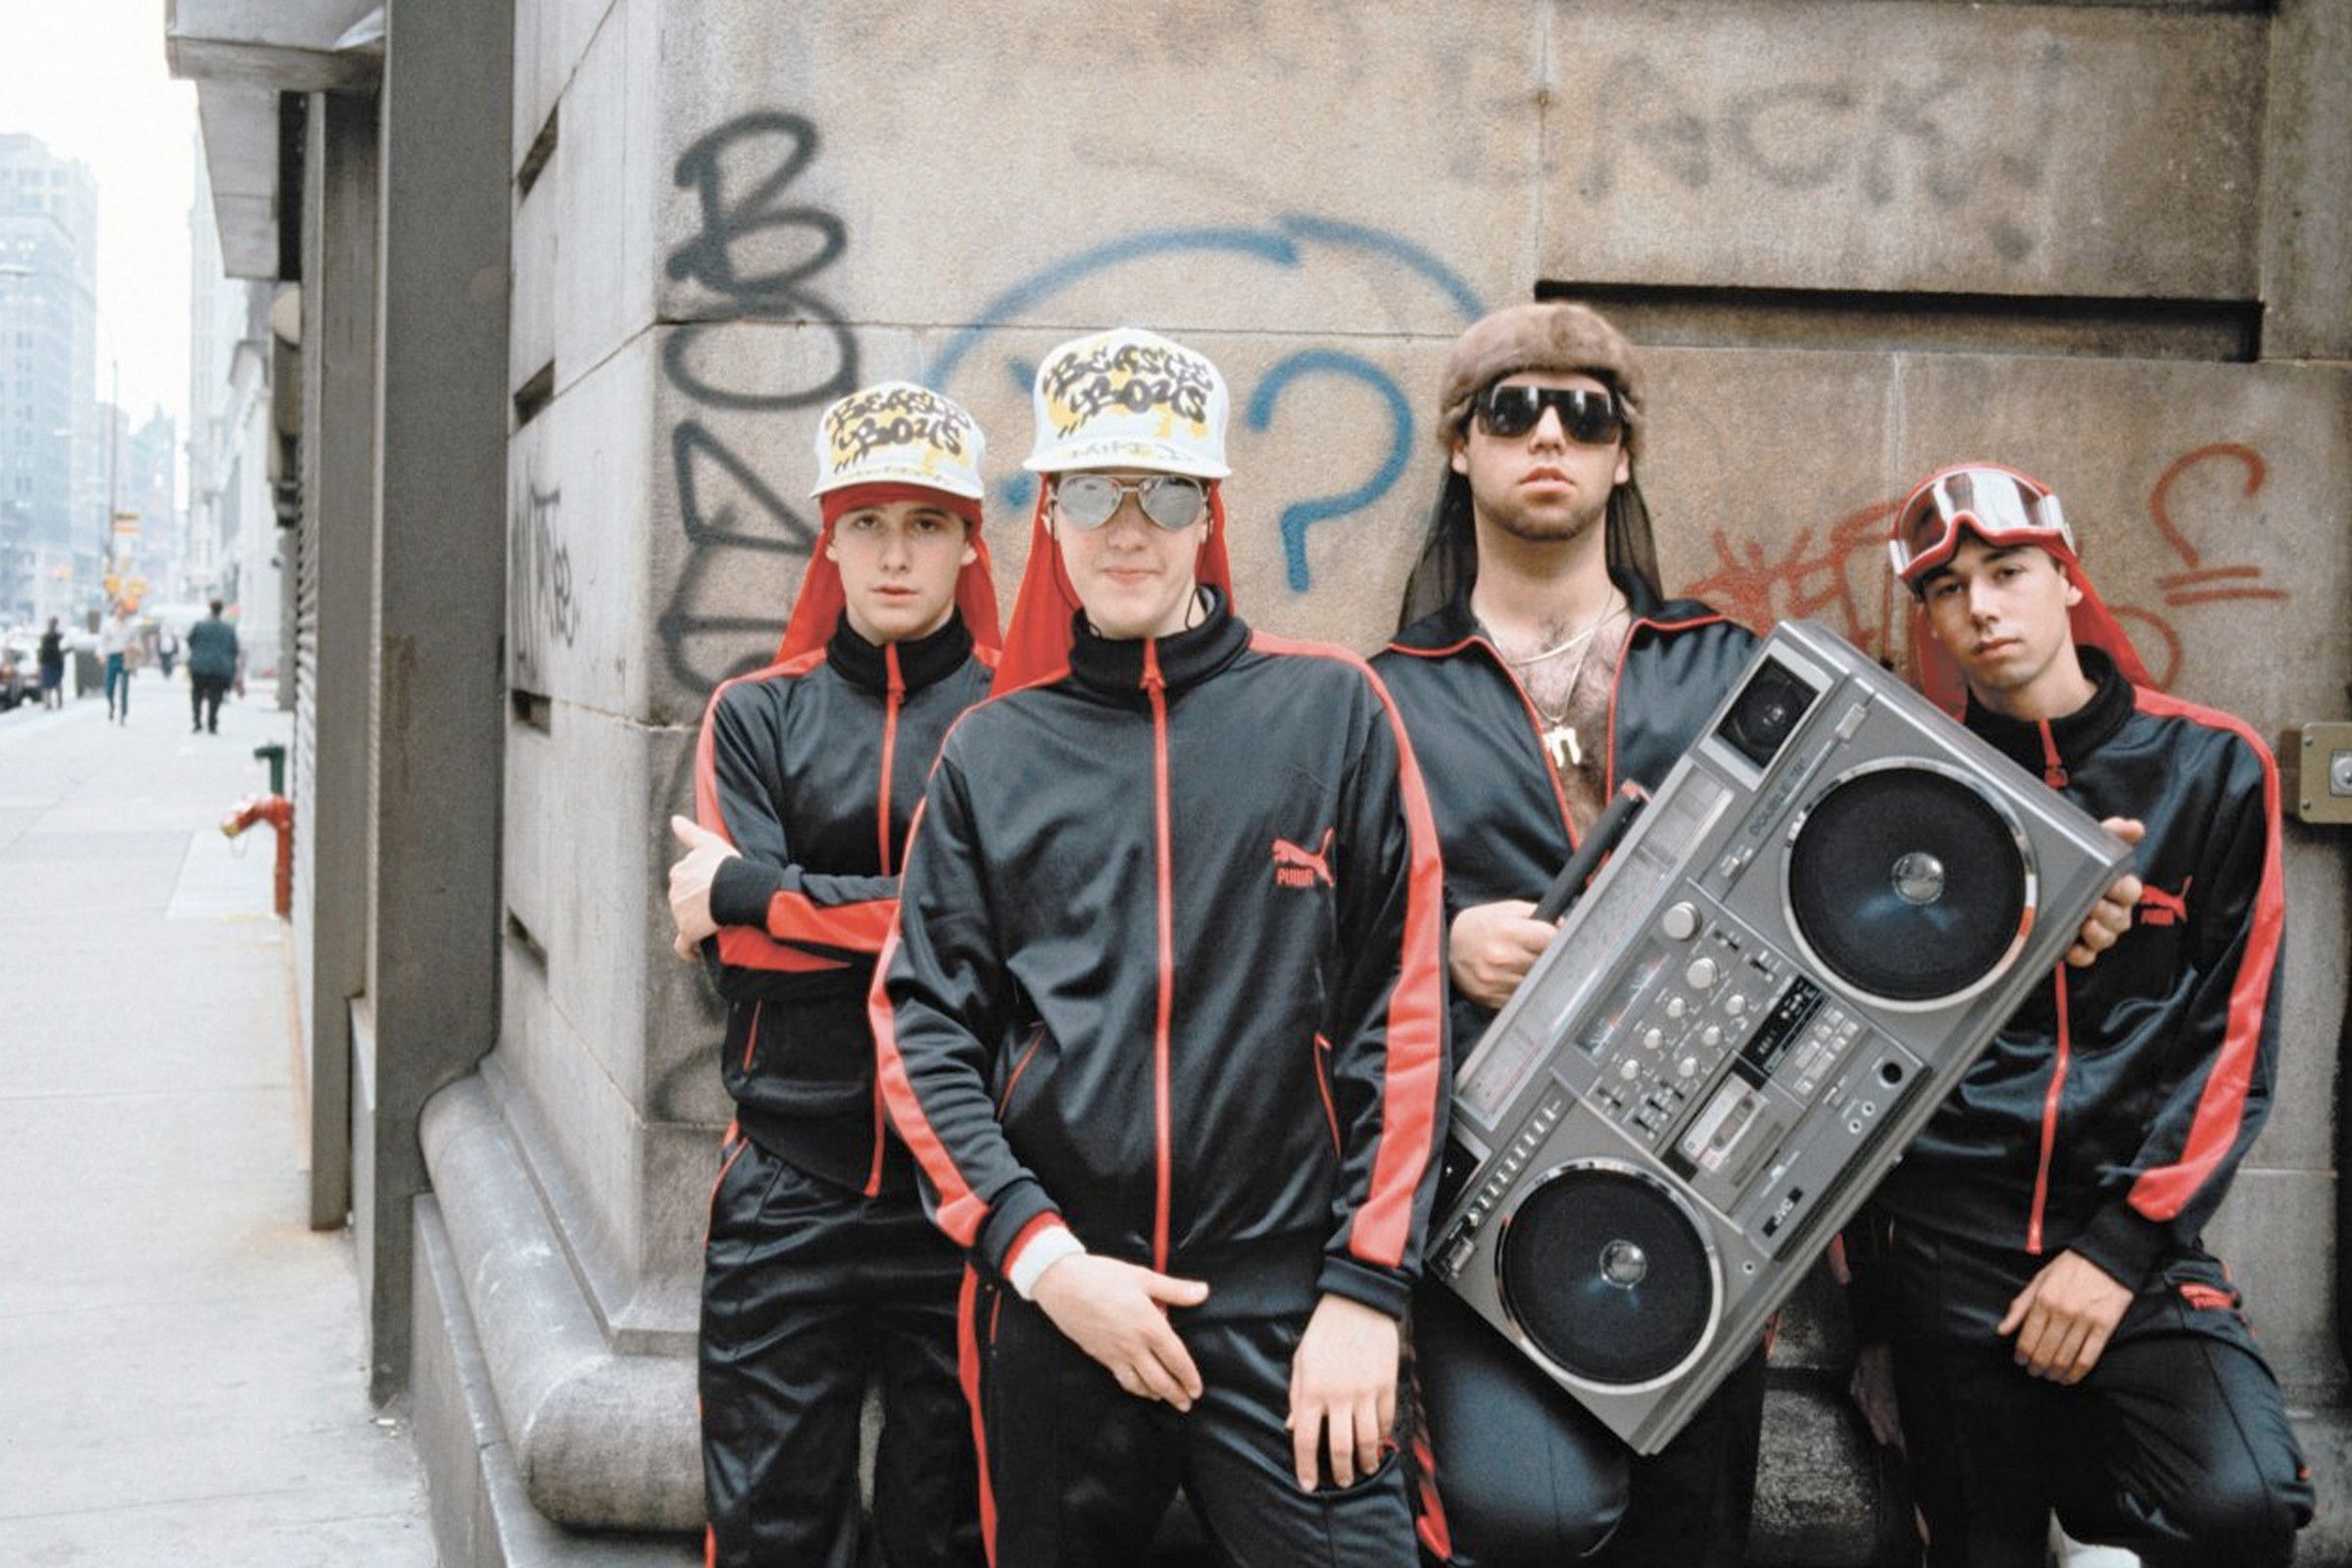 The Beastie Boys in Puma tracksuits with Rick Rubin (holding boombox)